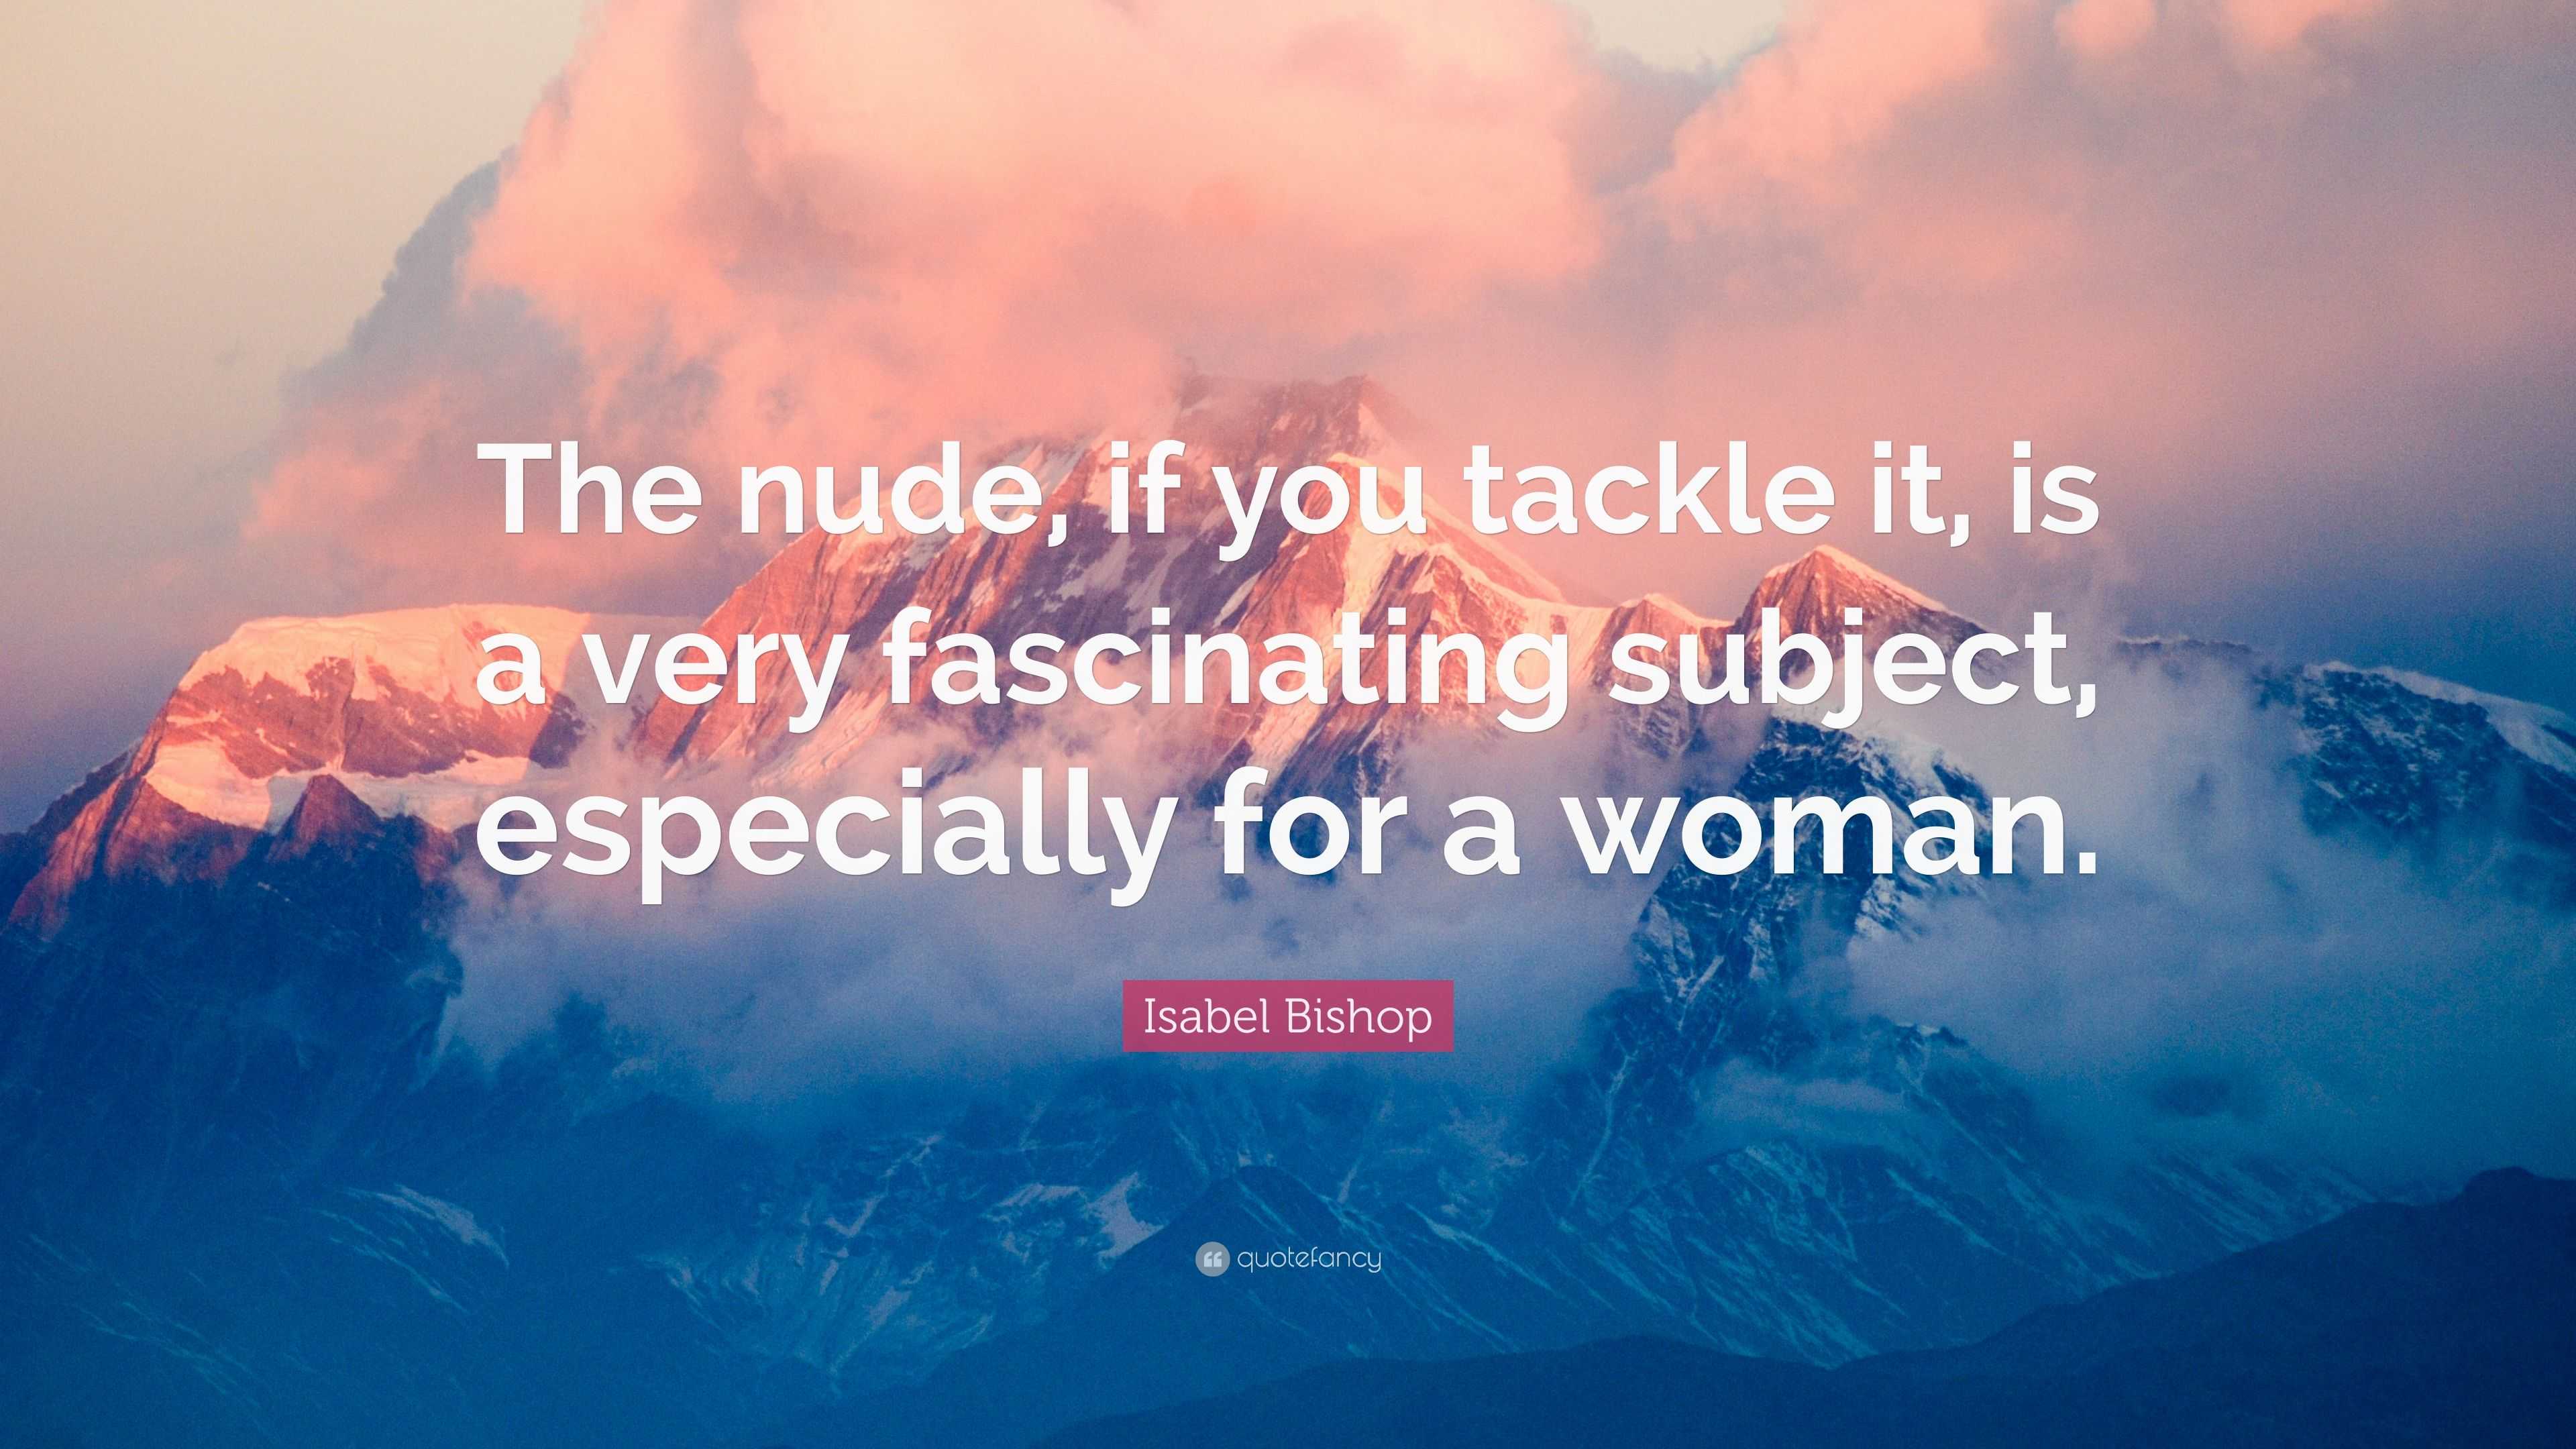 Isabel Bishop Quote: “The nude, if you tackle it, is a very ...